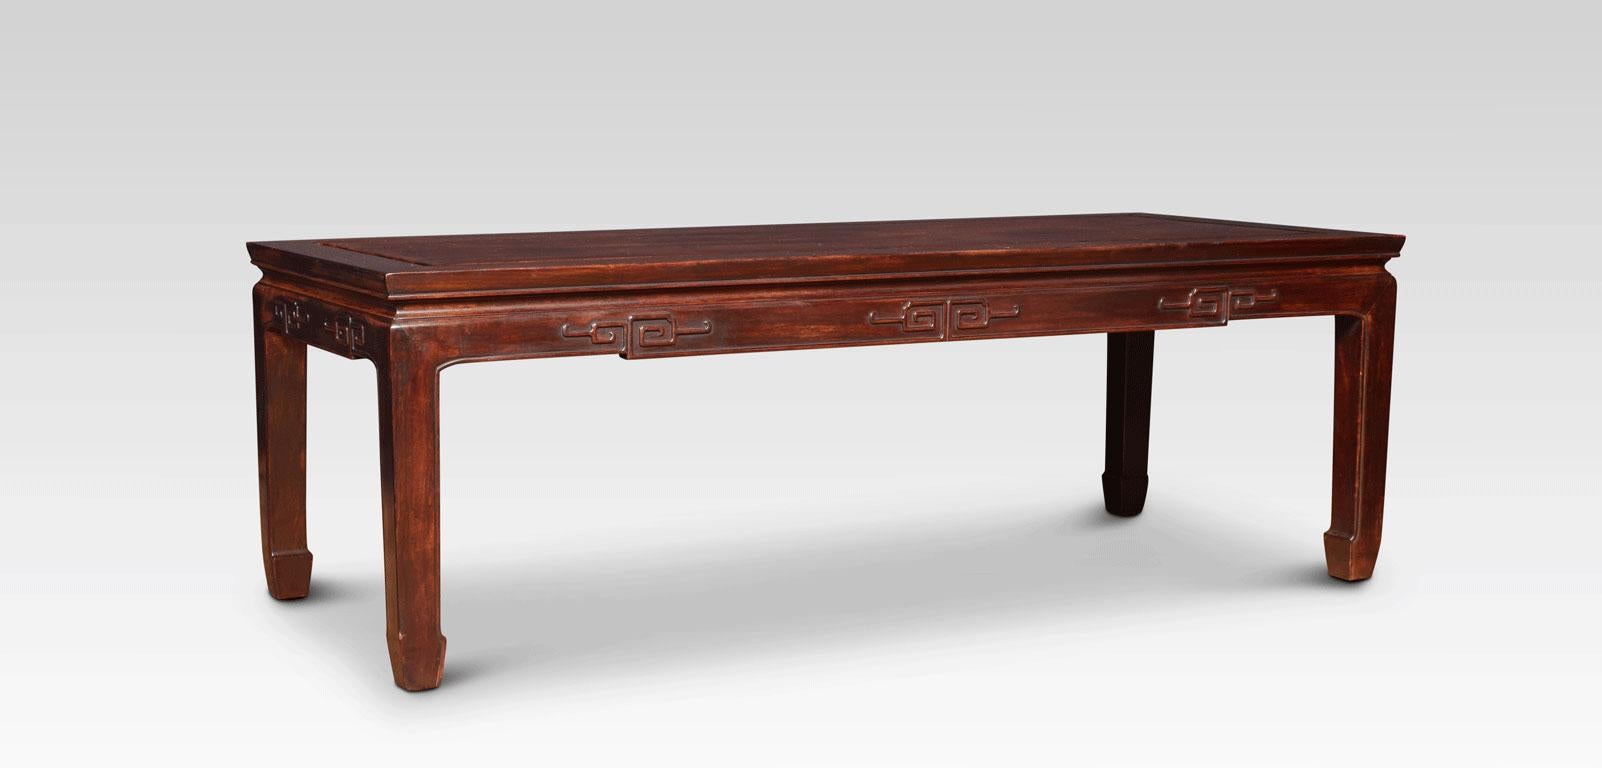 Chinese hardwood coffee table / opium table, of long rectangular form with carved apron. All raised up on four square sectional legs.
Dimensions:
Height 16 inches
Width 48 inches
Depth 20 inches.